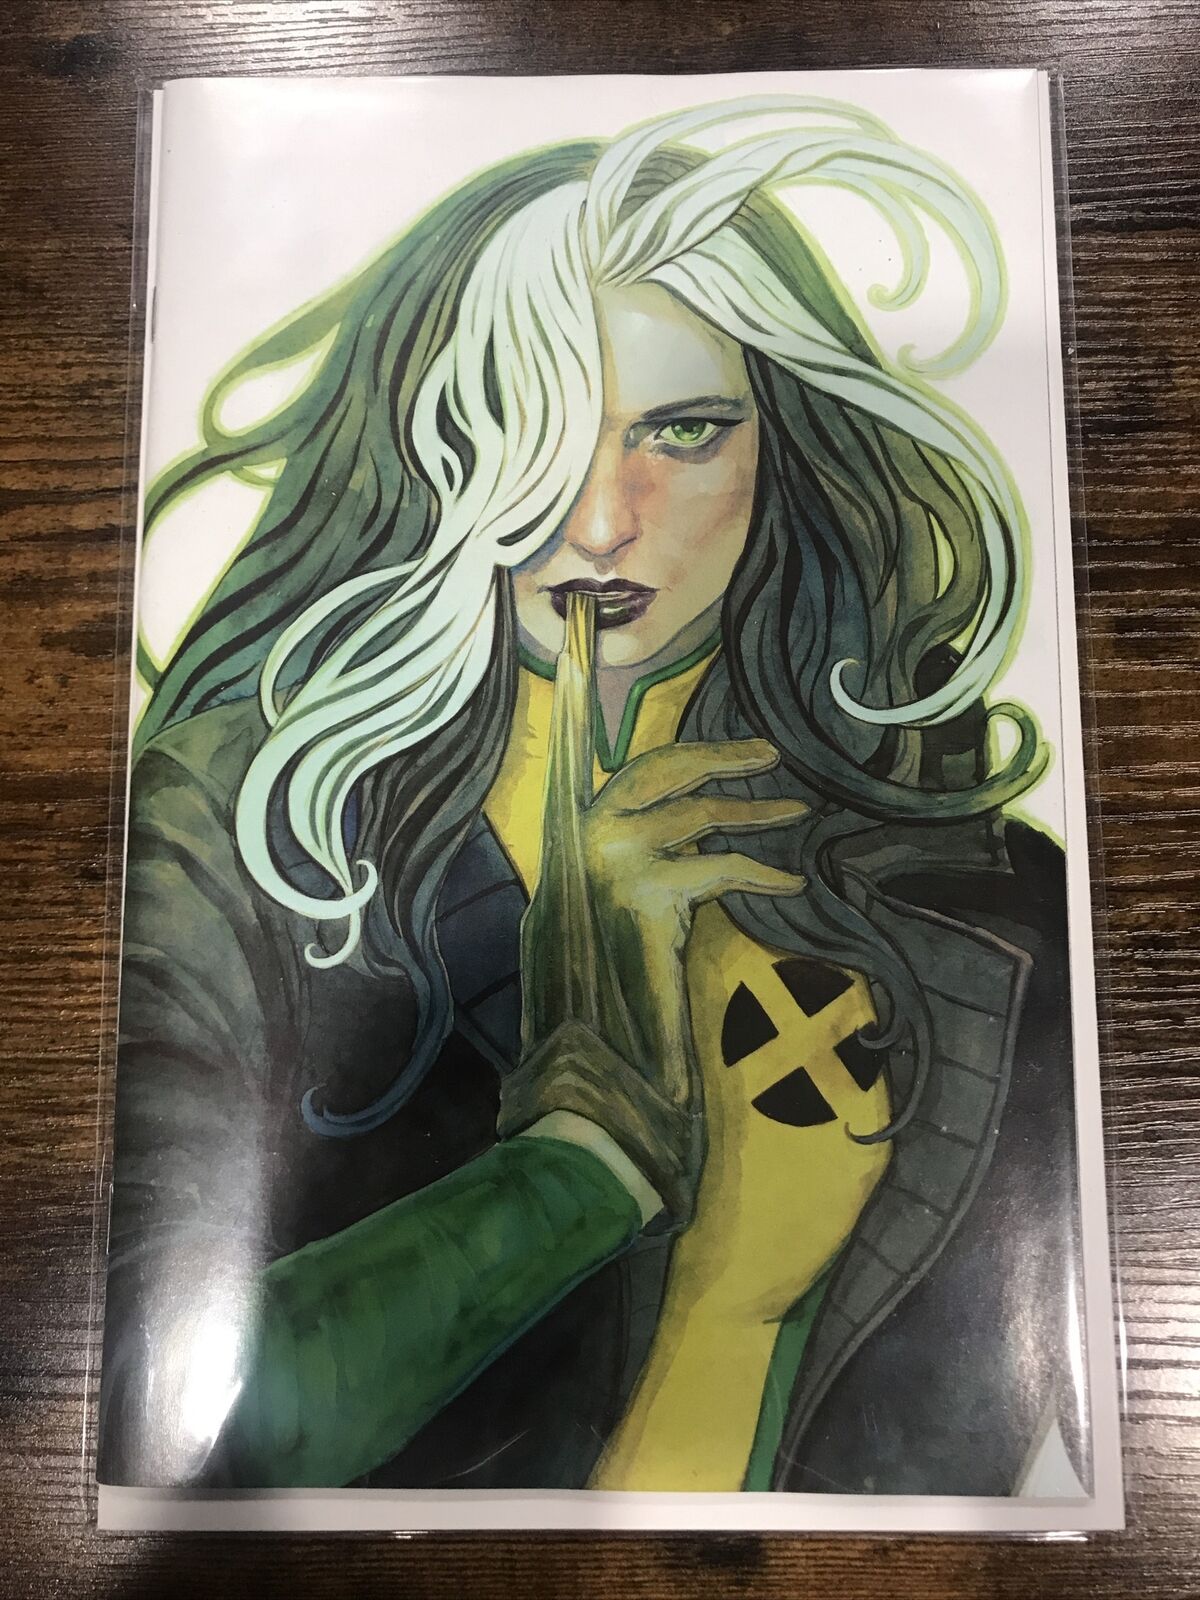 WOMEN OF MARVEL #1 * NM+ * STEPHANIE HANS VIRGIN VARIANT ROGUE SCARLET WITCH 🔥